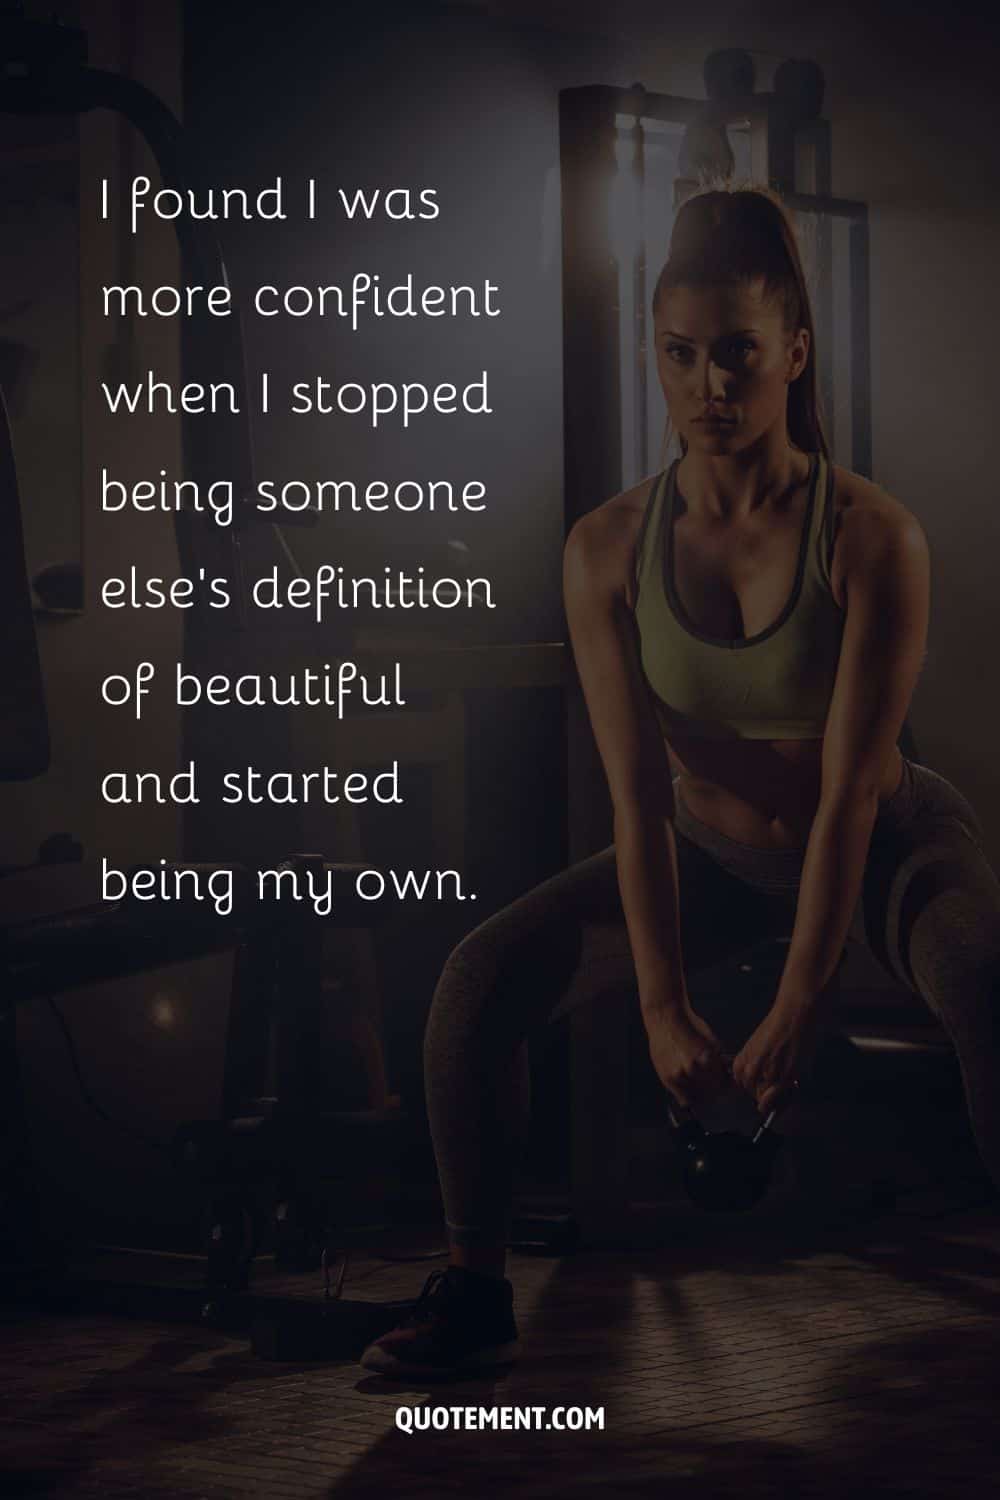 exercising girl image representing motivational fitness quote